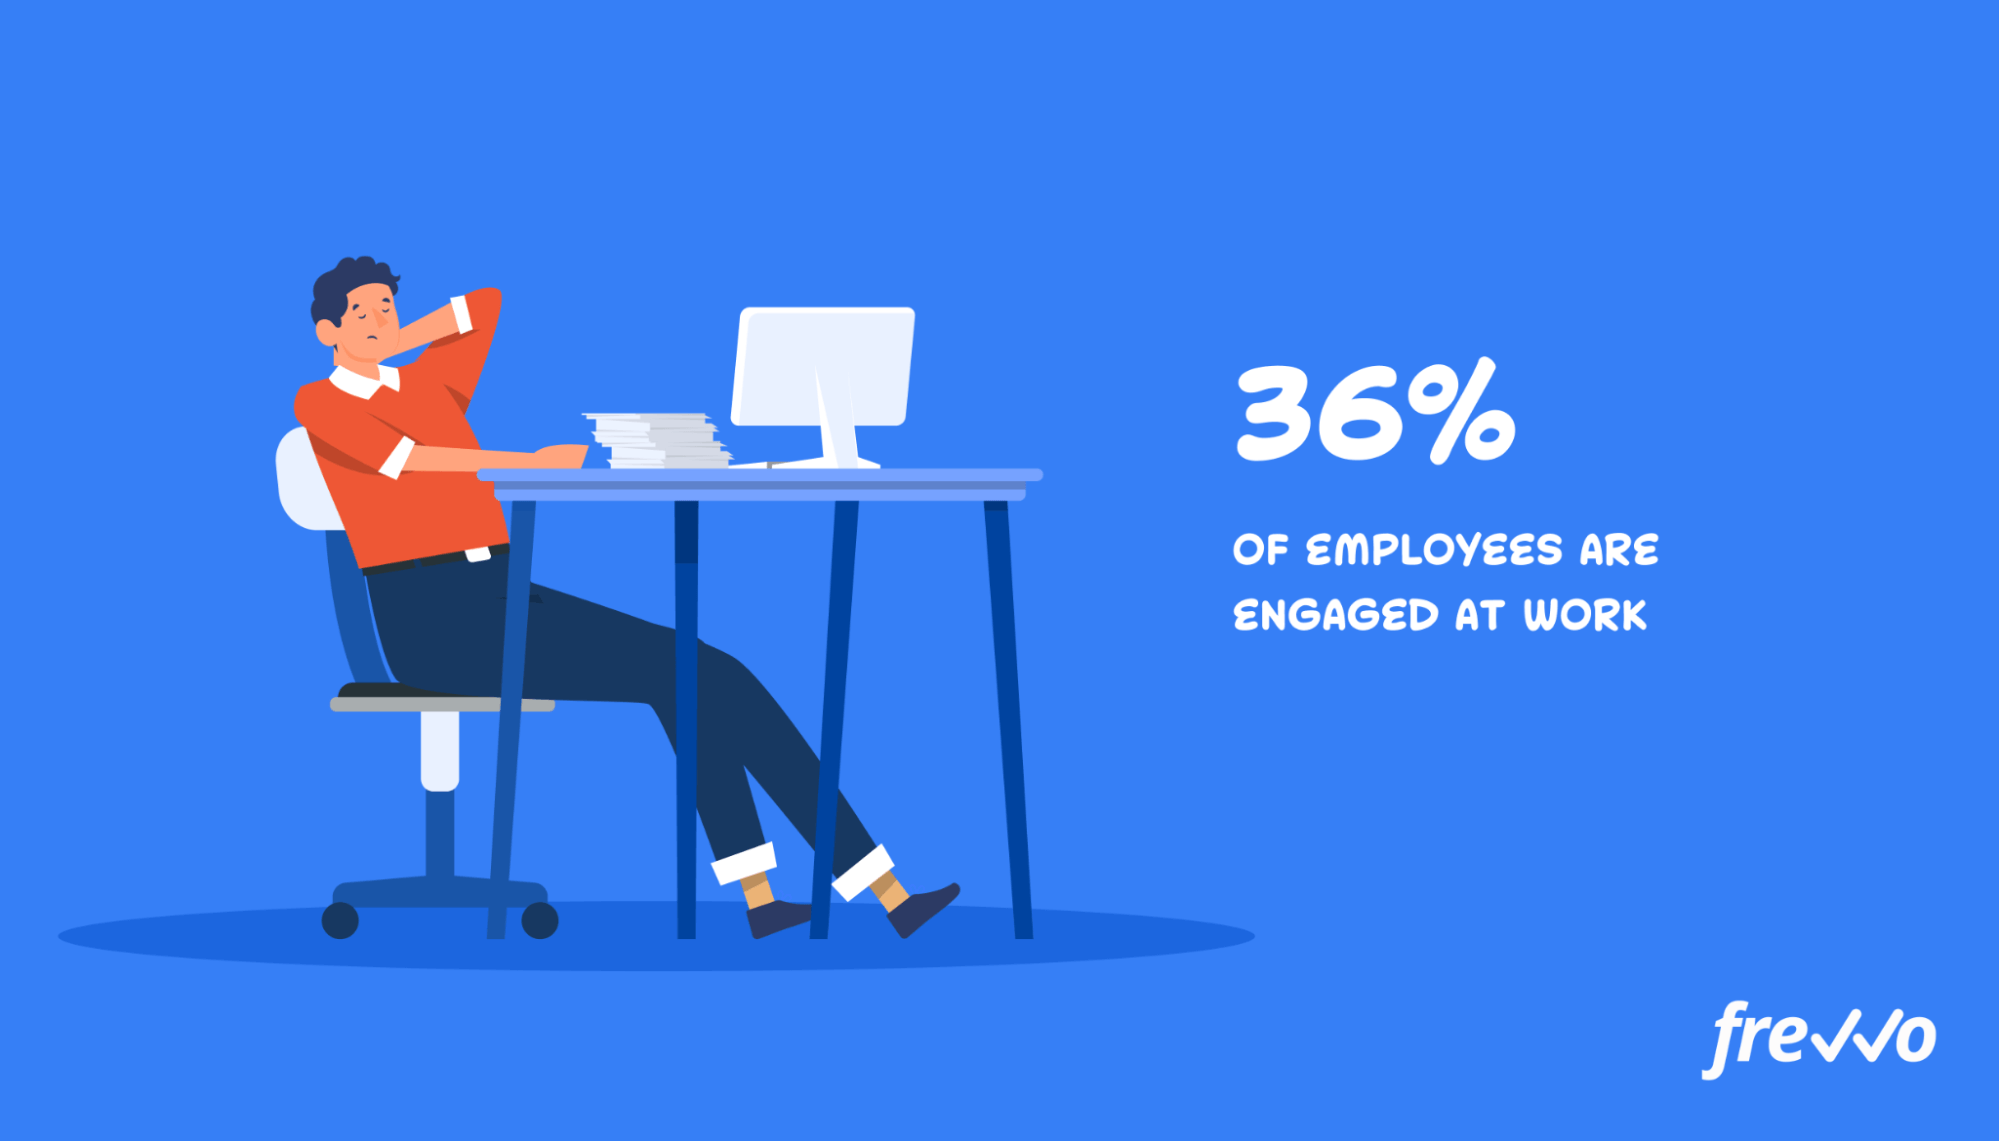 36% of employees are engaged at work